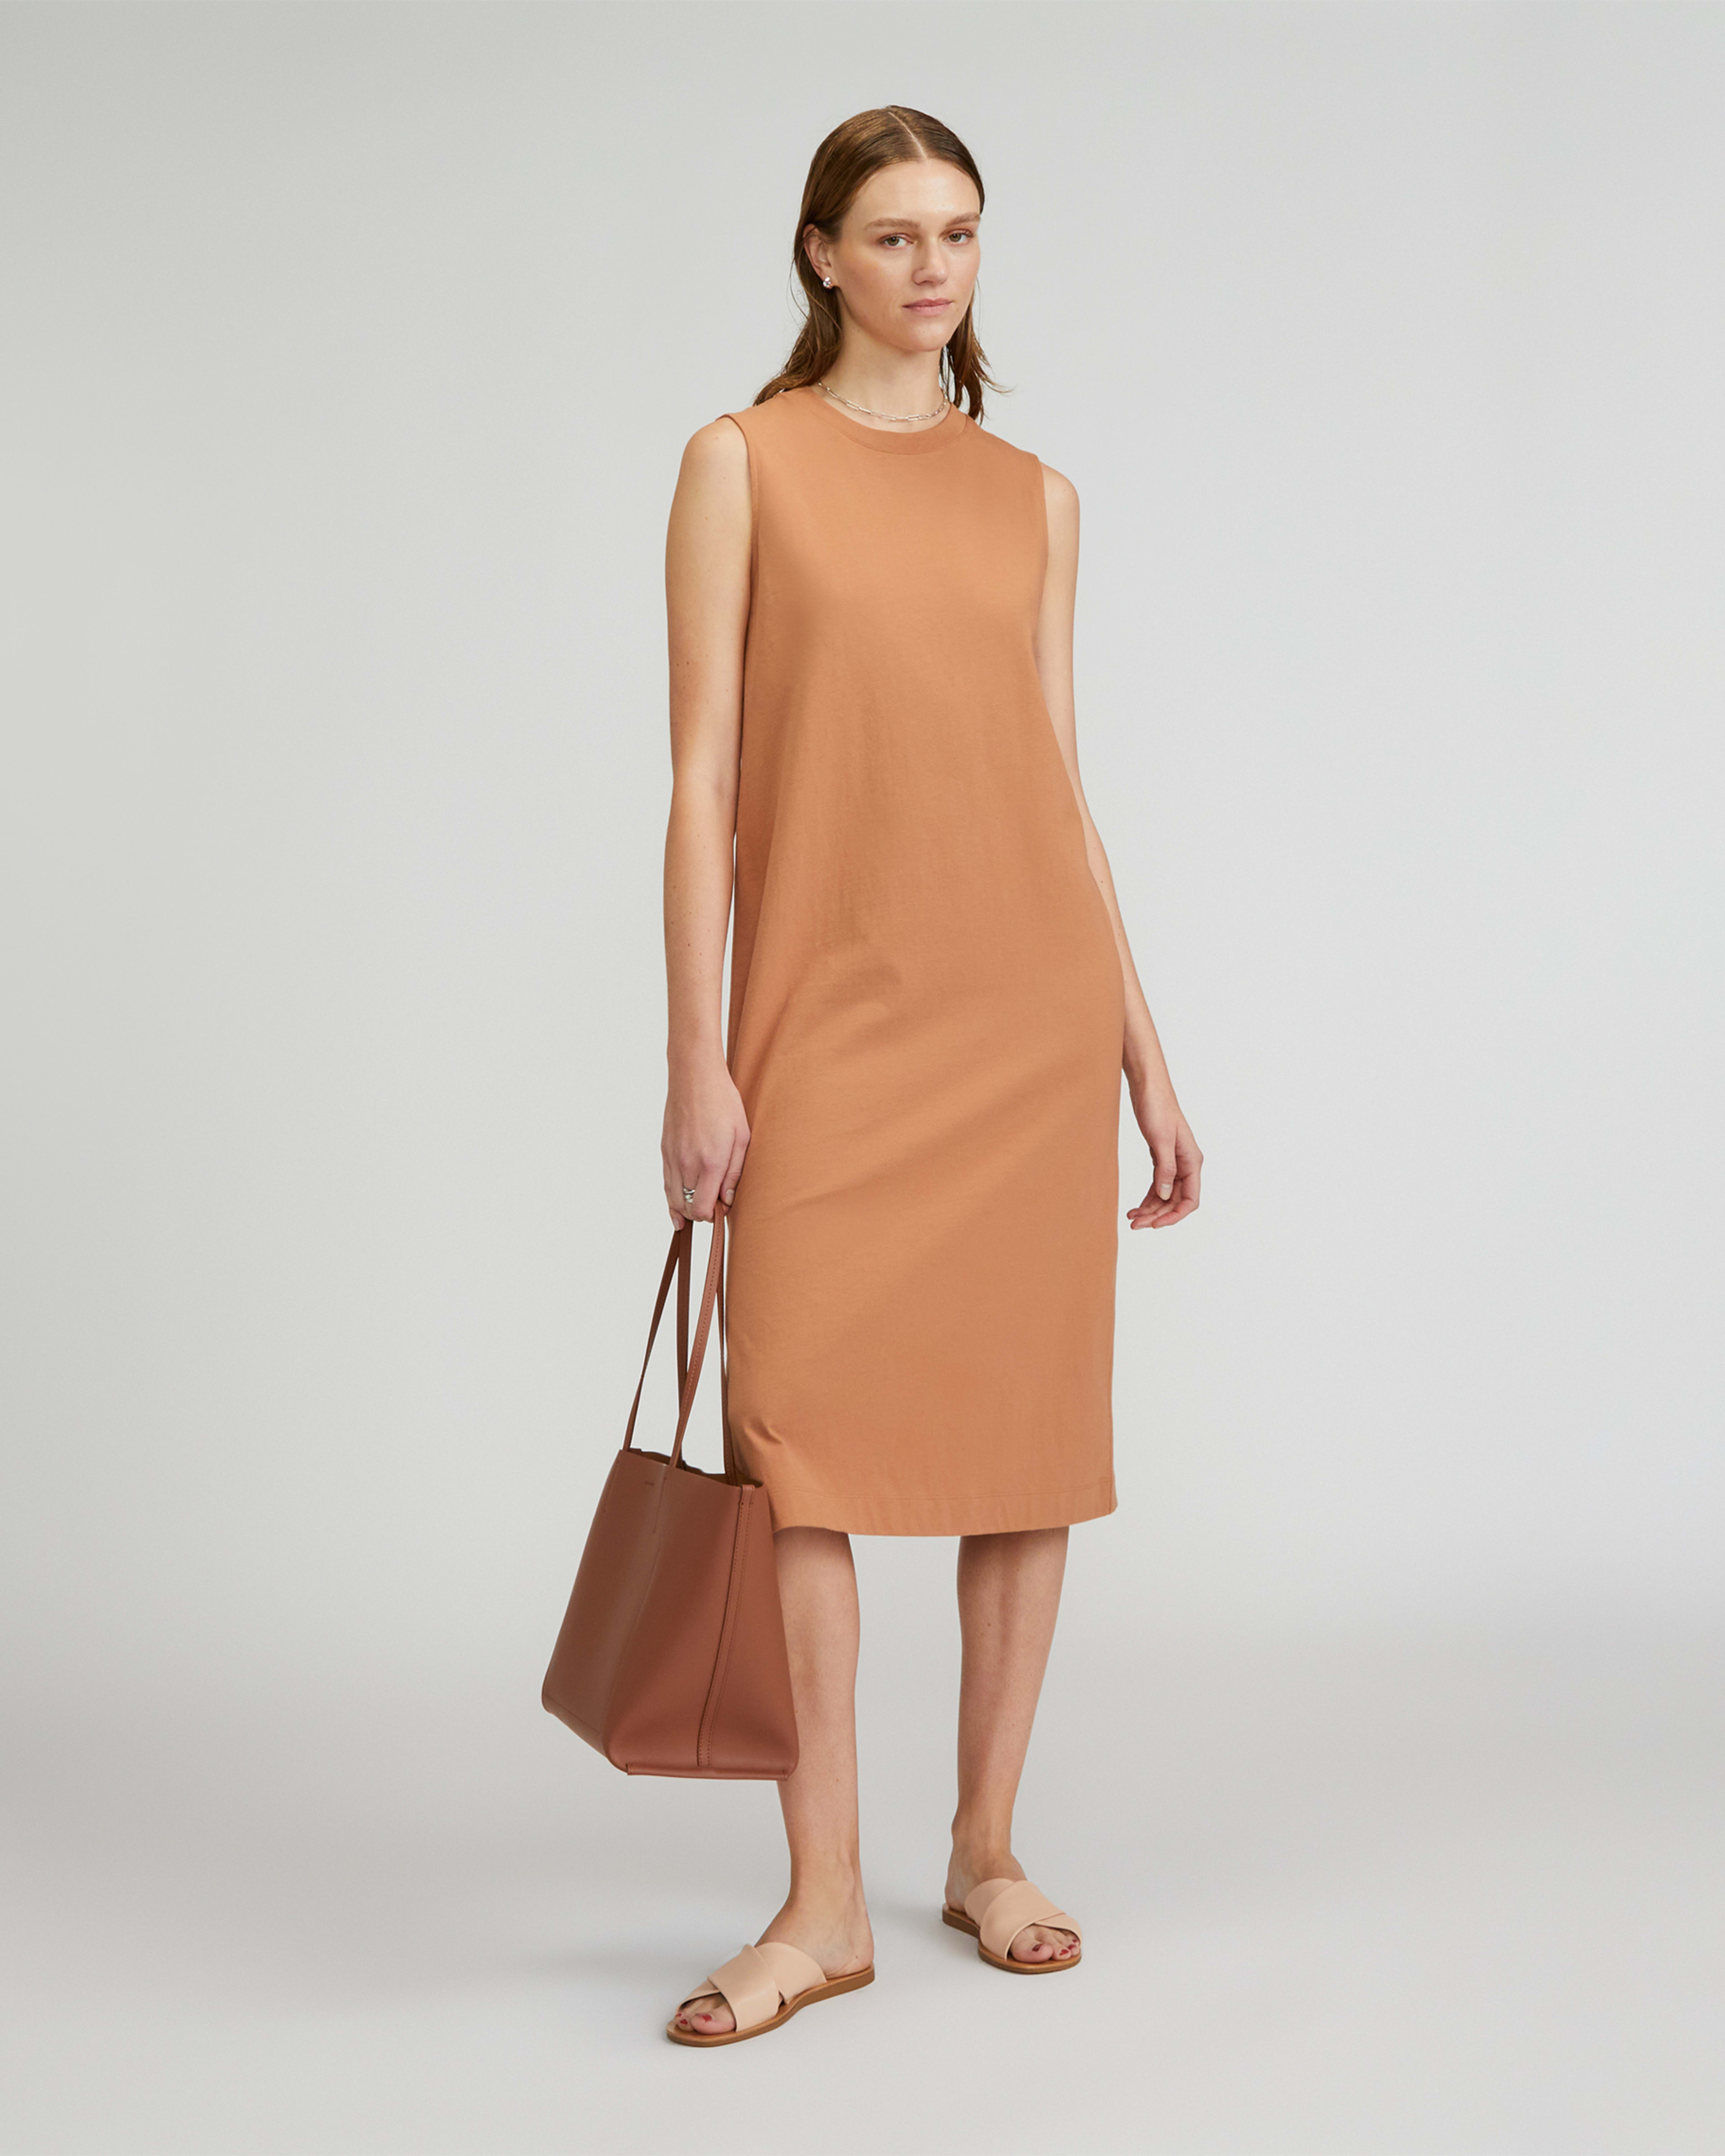 Everlane - Dress for the weather you want 🌻 Introducing